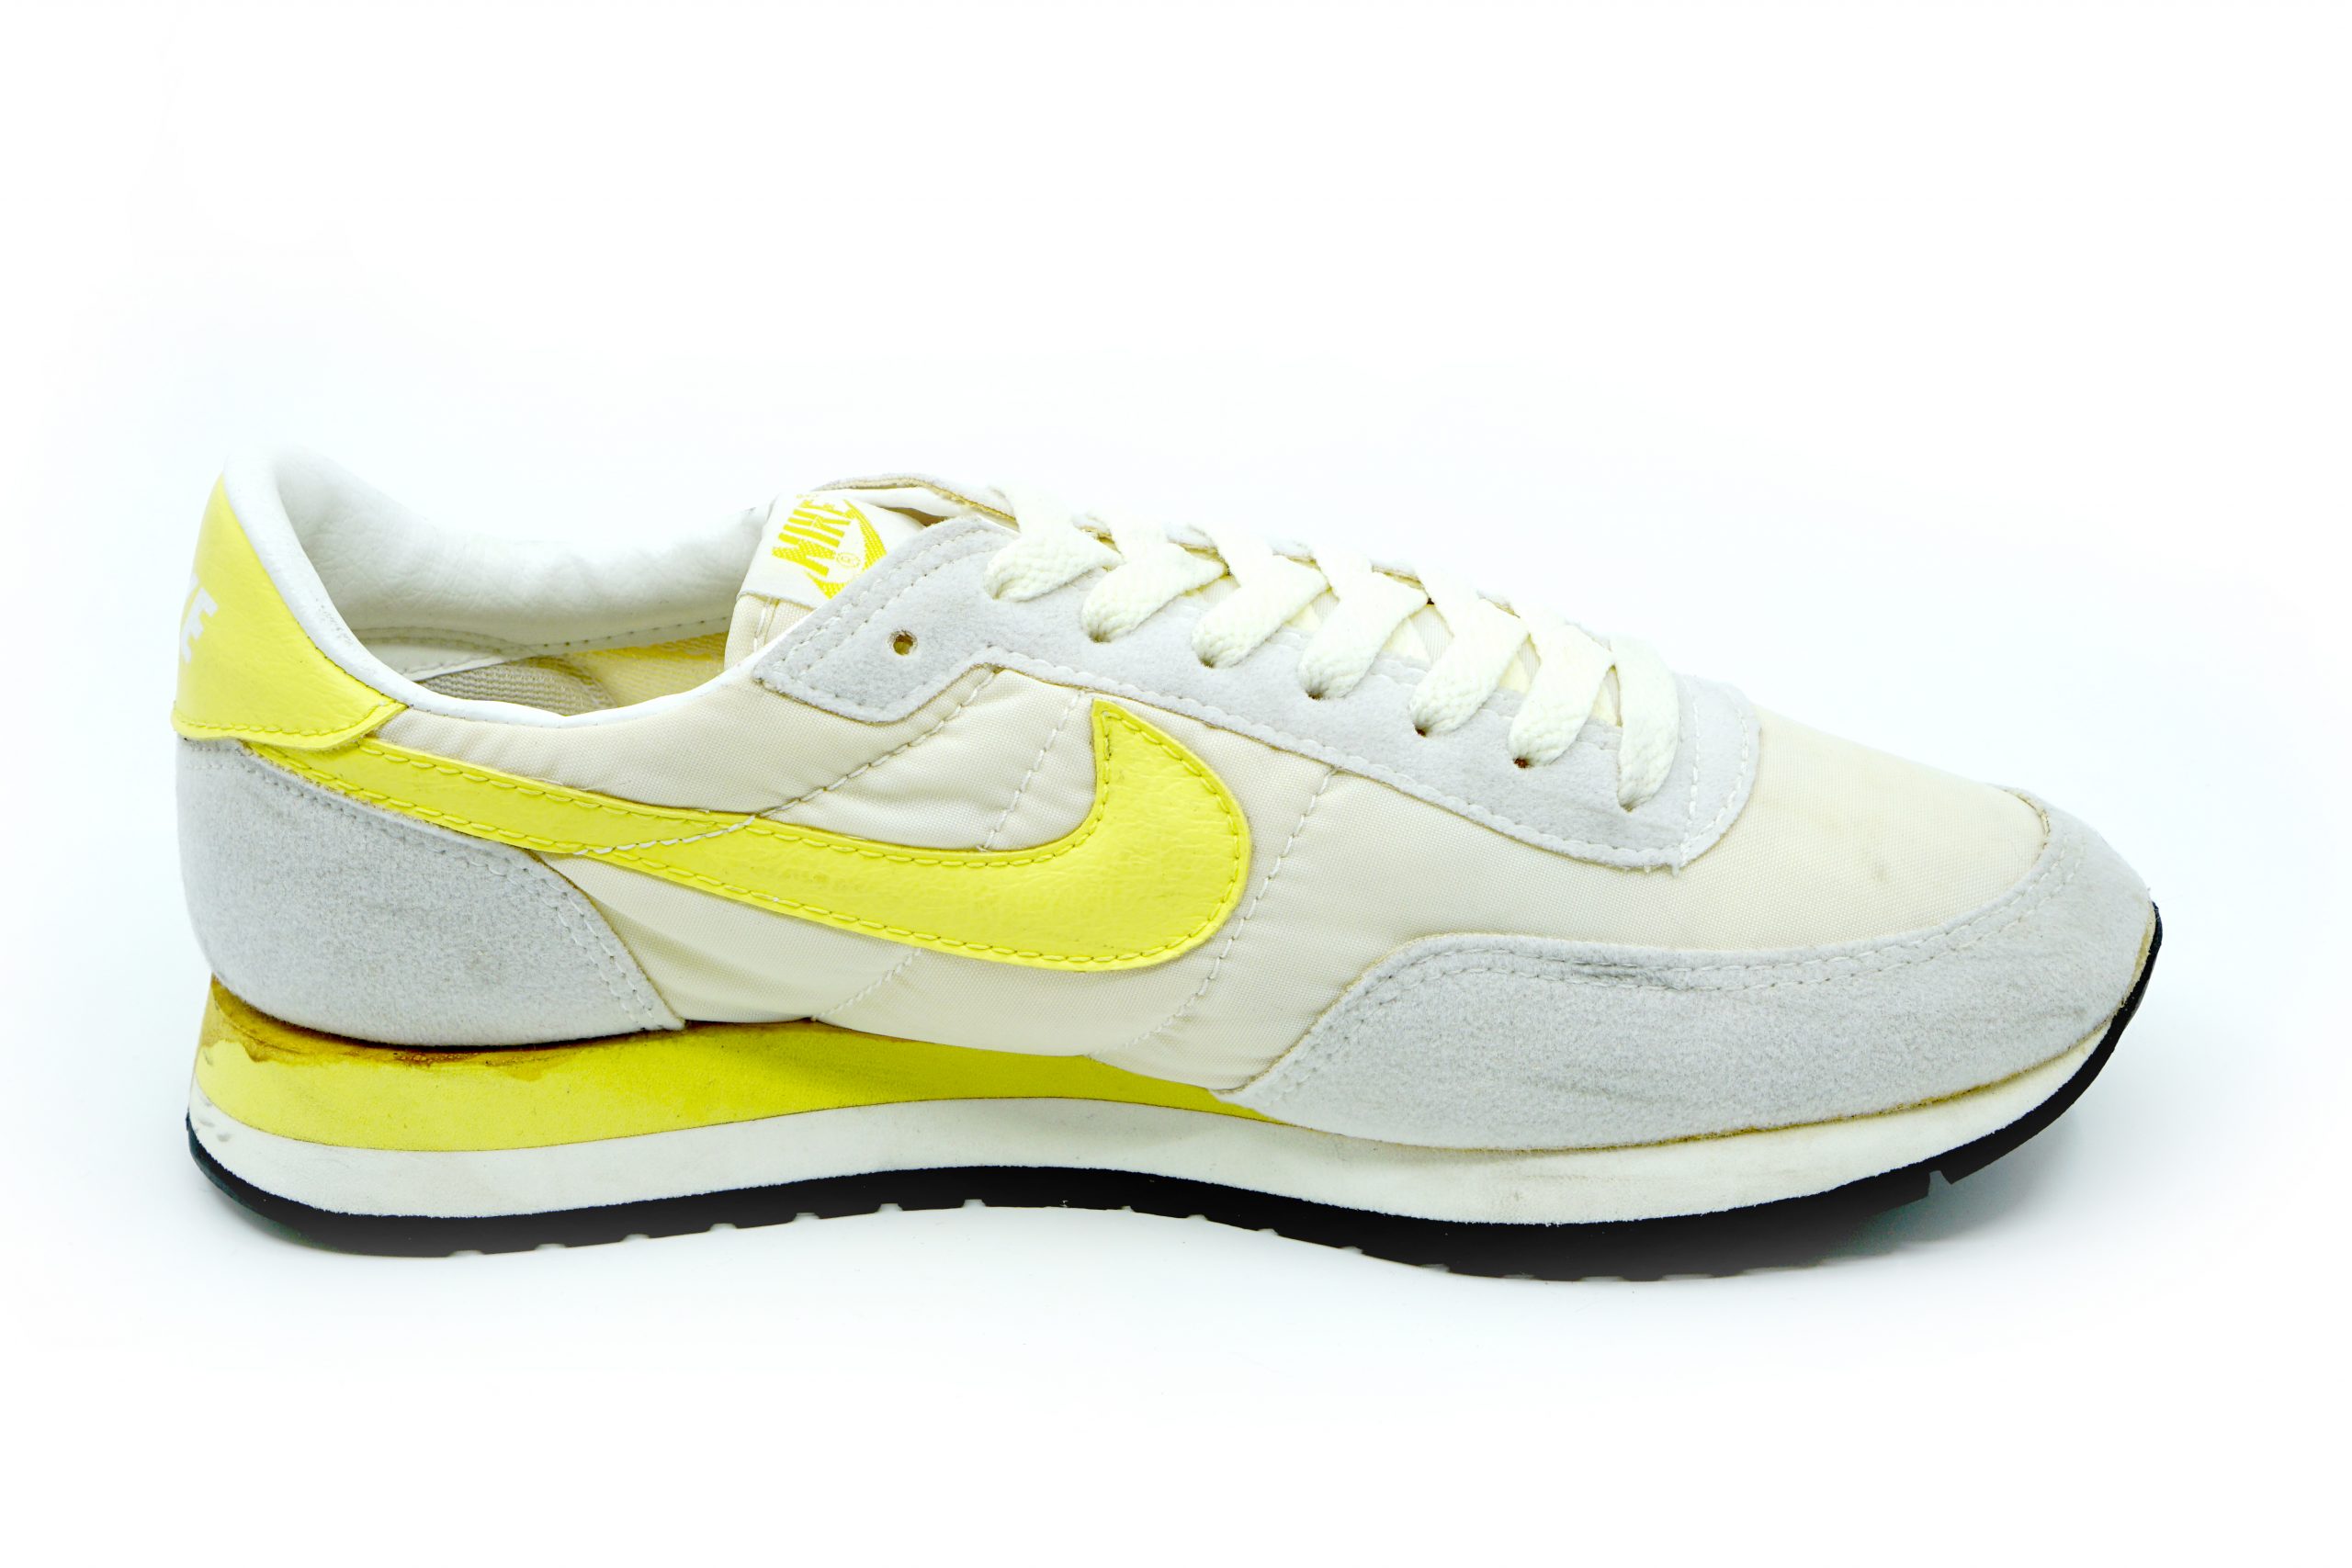 Vintage 1986 Rio II - Shoes Your